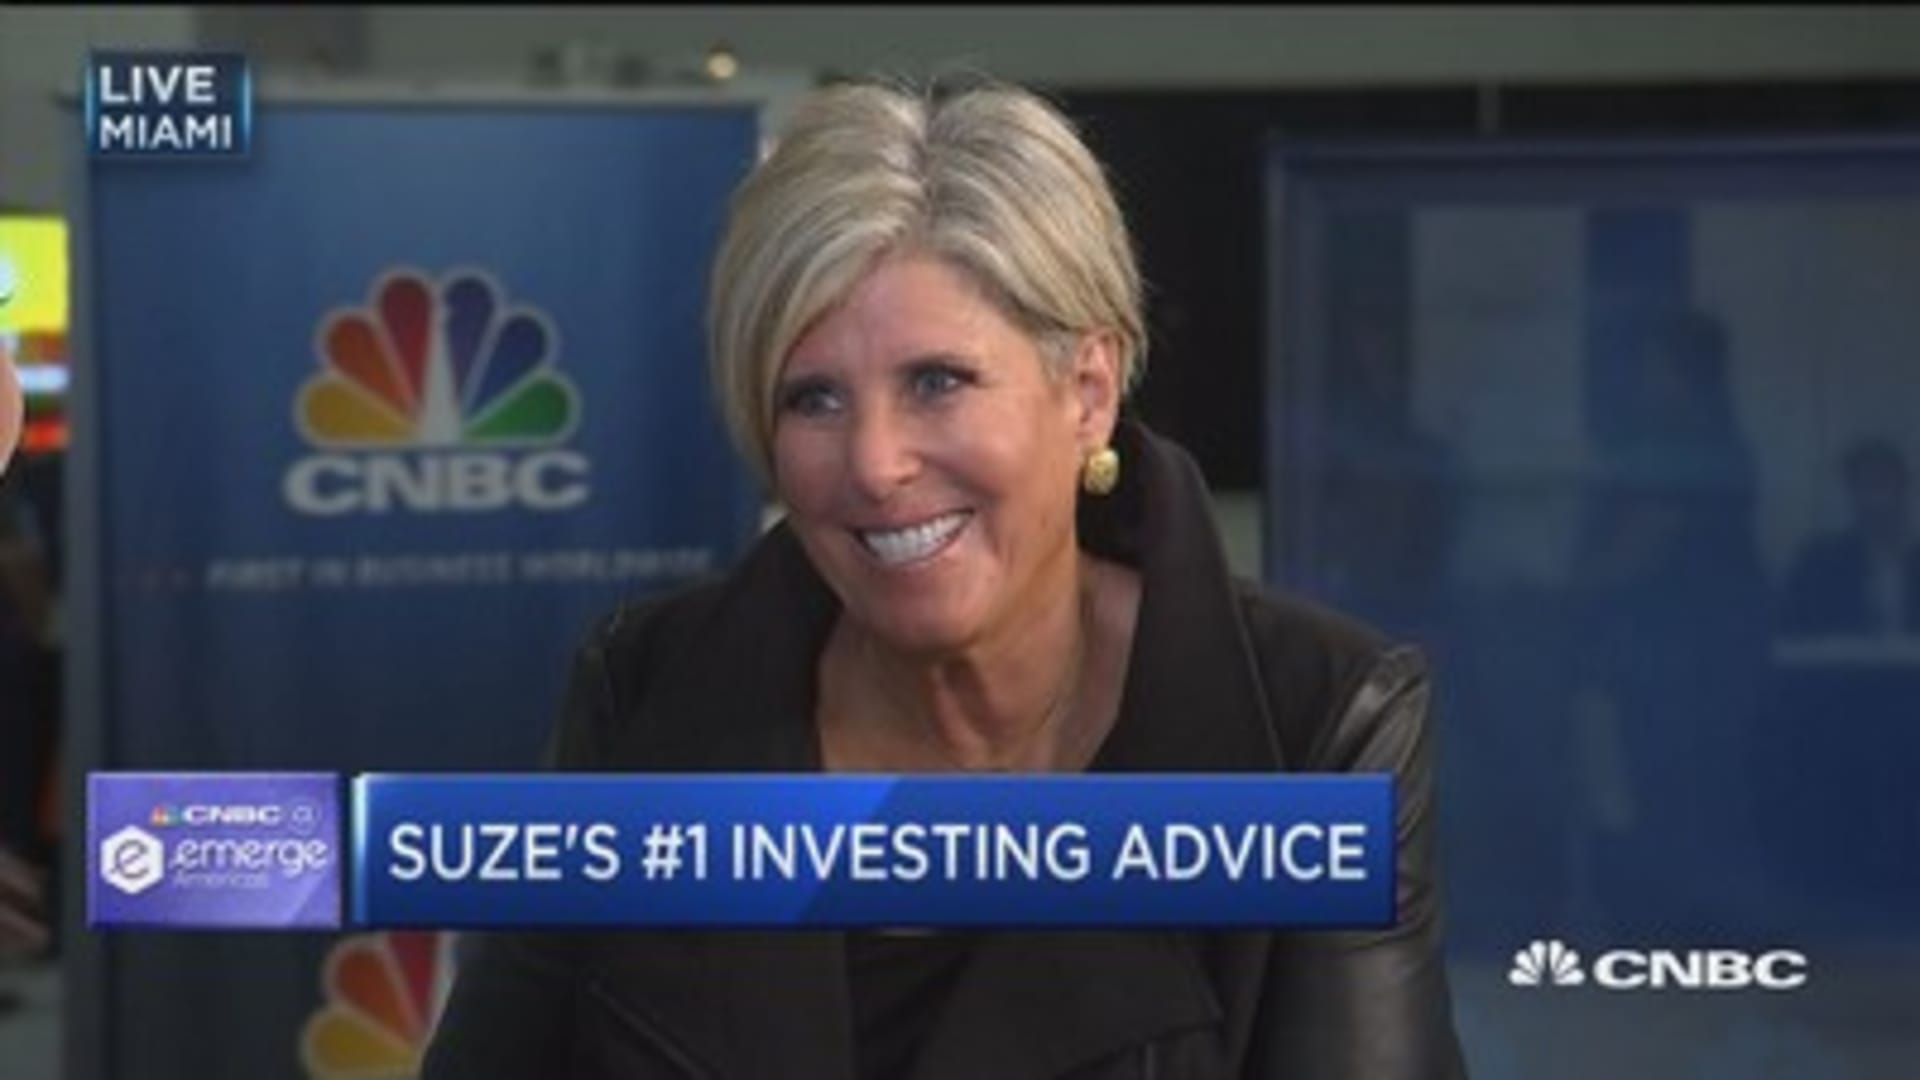 Suze orman investing for beginners tips for investing in stocks